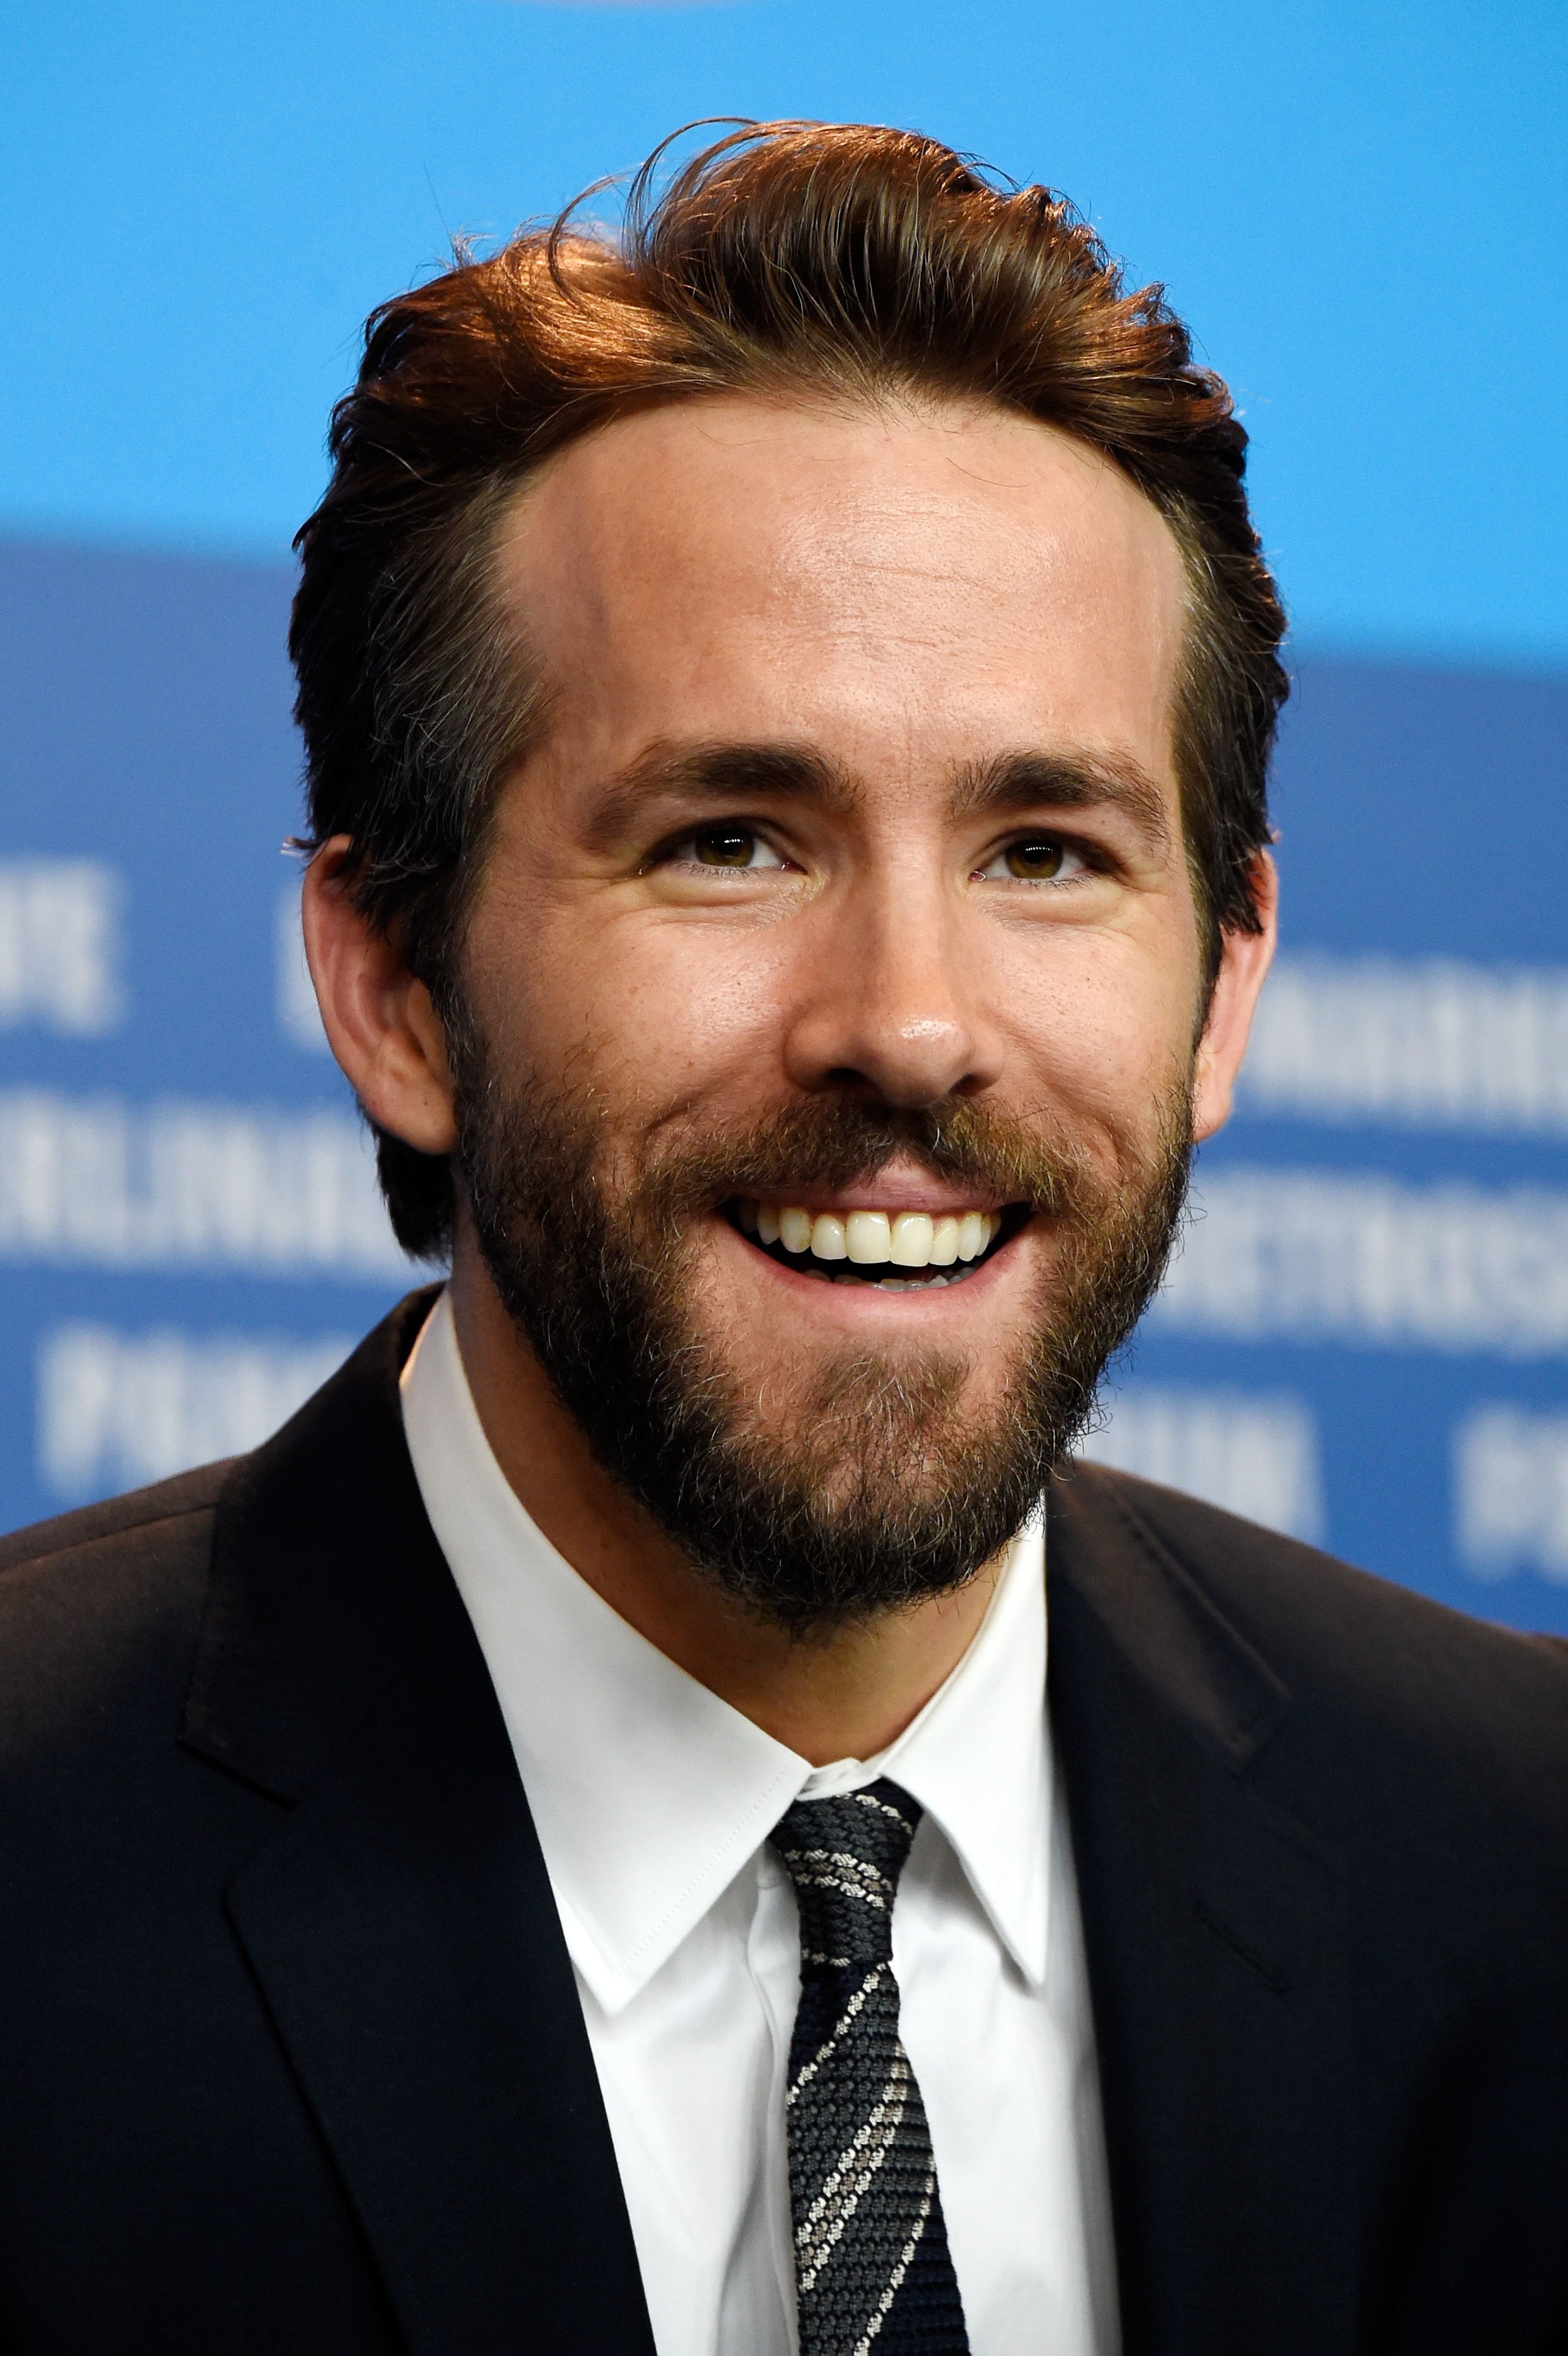 Ryan Reynolds at the 'Woman in Gold' press conference during the 65th Berlinale International Film Festival at Grand Hyatt Hotel on February 9, 2015 in Berlin, Germany | Photo: Getty Images